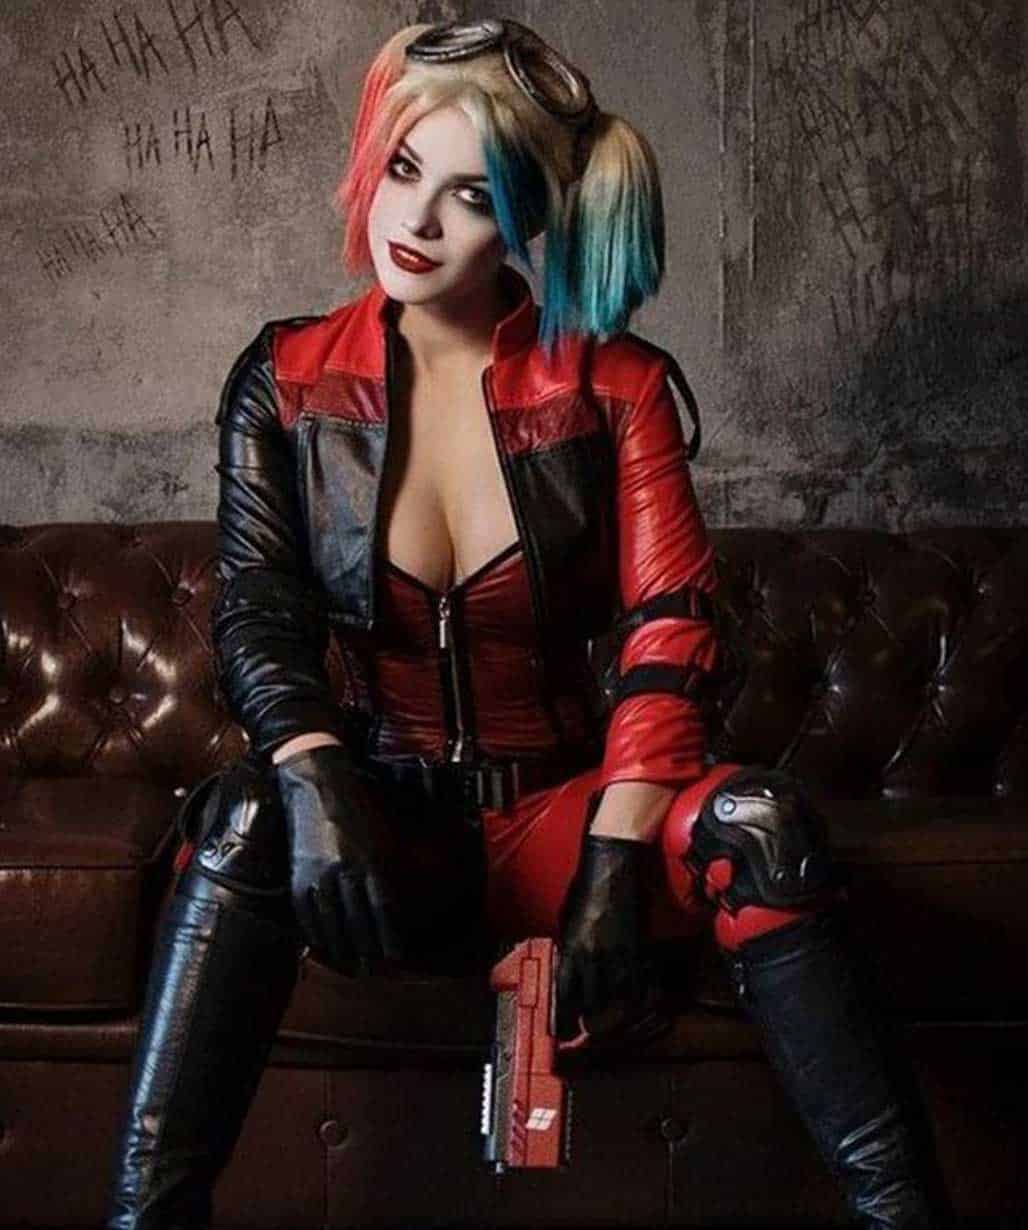 injustice-2-harley-quinn-jacket-with-vest-outfit